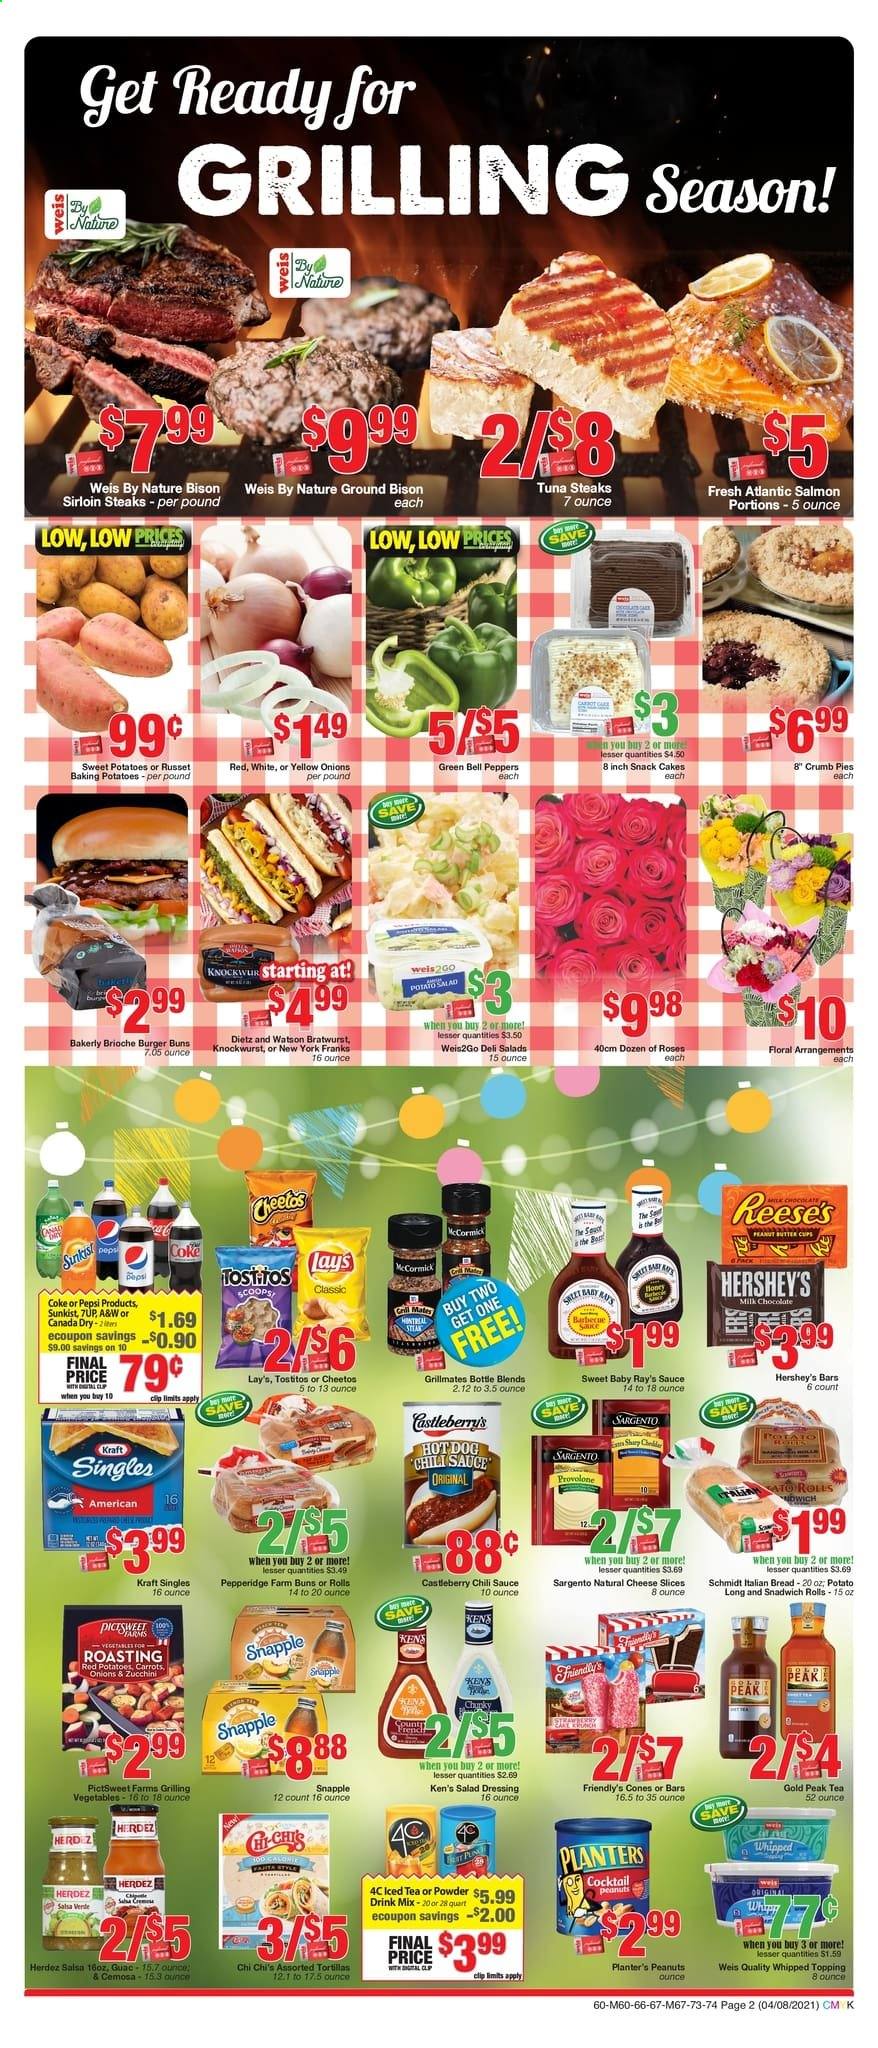 thumbnail - Weis Flyer - 04/08/2021 - 05/06/2021 - Sales products - bread, tortillas, cake, buns, burger buns, brioche, bell peppers, carrots, russet potatoes, sweet potato, zucchini, potatoes, onion, peppers, red potatoes, pears, steak, sirloin steak, bison meat, salmon, tuna, sauce, Kraft®, Dietz & Watson, bratwurst, sandwich slices, sliced cheese, Kraft Singles, Sargento, Reese's, Hershey's, Friendly's Ice Cream, milk chocolate, chocolate, snack, Cheetos, Lay’s, Tostitos, topping, salad dressing, chilli sauce, dressing, salsa, peanuts, Planters, Canada Dry, Coca-Cola, Pepsi, 7UP, Snapple, Gold Peak Tea, cup, rose. Page 2.